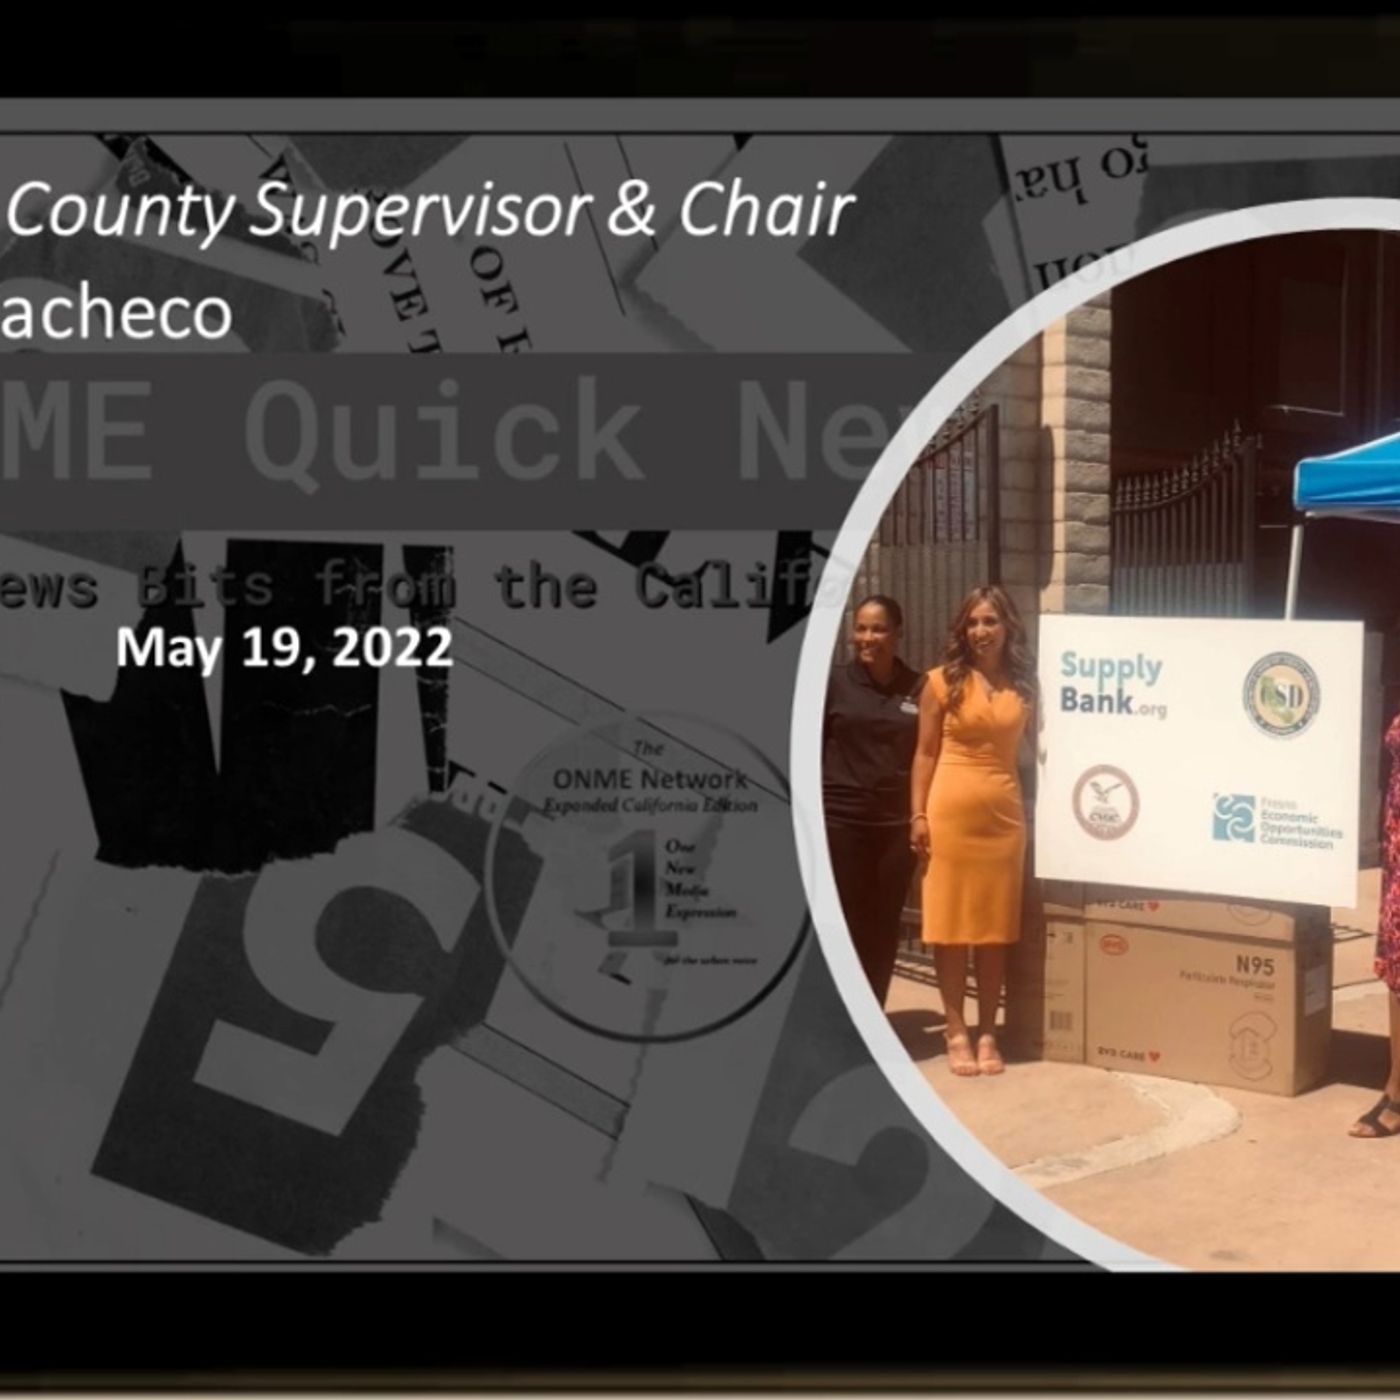 ONME Quick News Bits for Fresno County, Thursday, May 26, 2022: Supervisor Pacheco seeks community partners to help struggling parents in hi